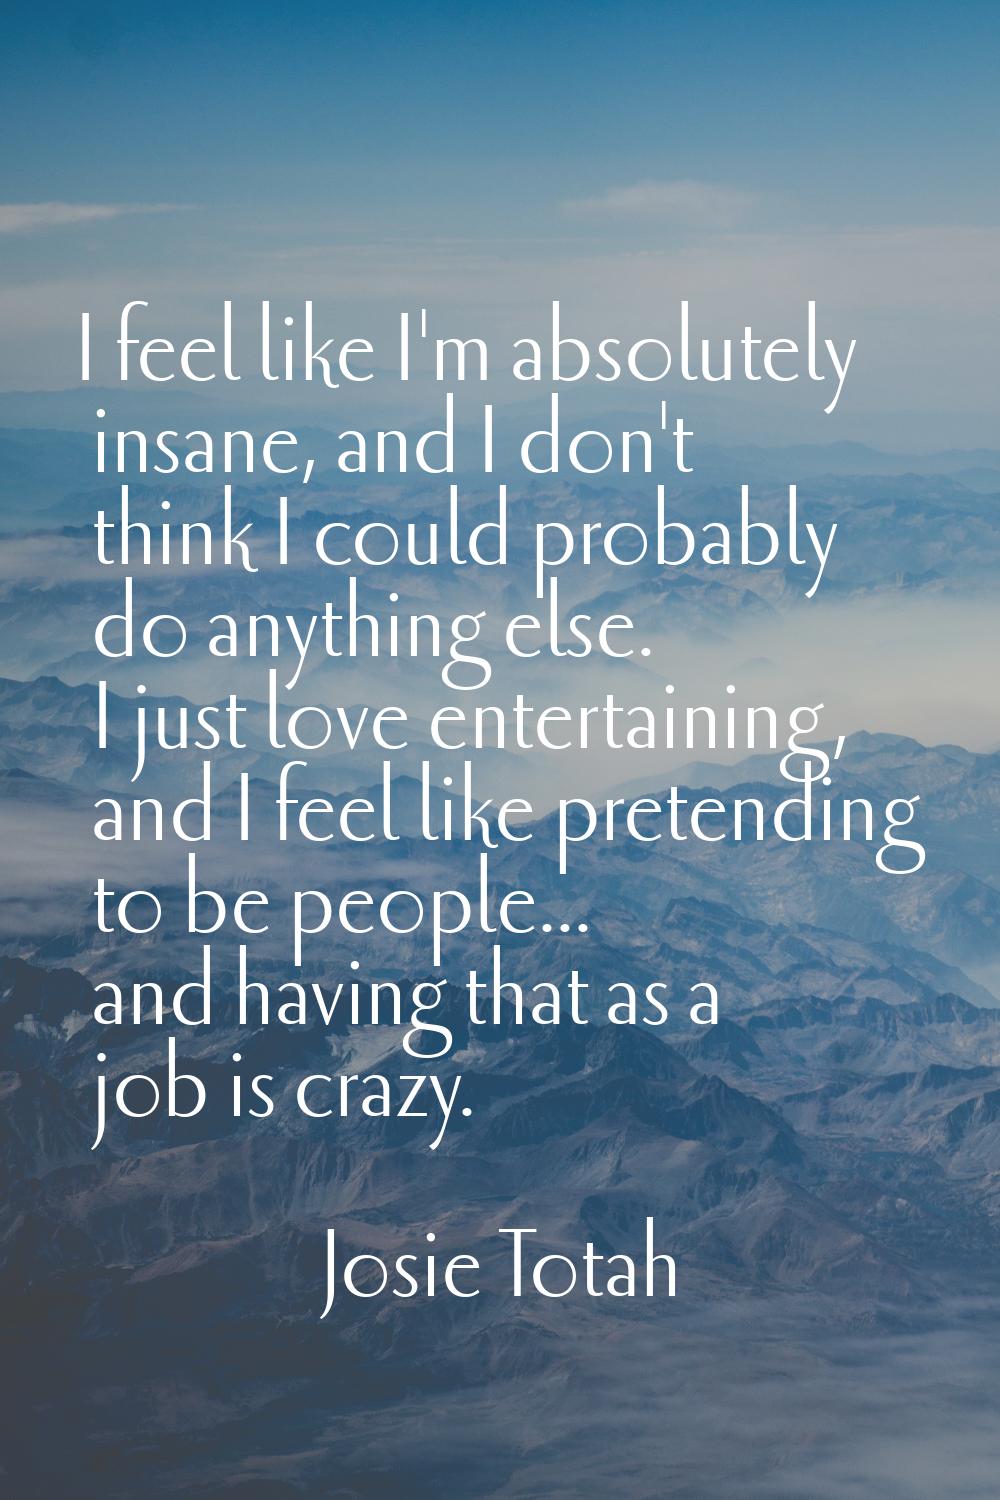 I feel like I'm absolutely insane, and I don't think I could probably do anything else. I just love